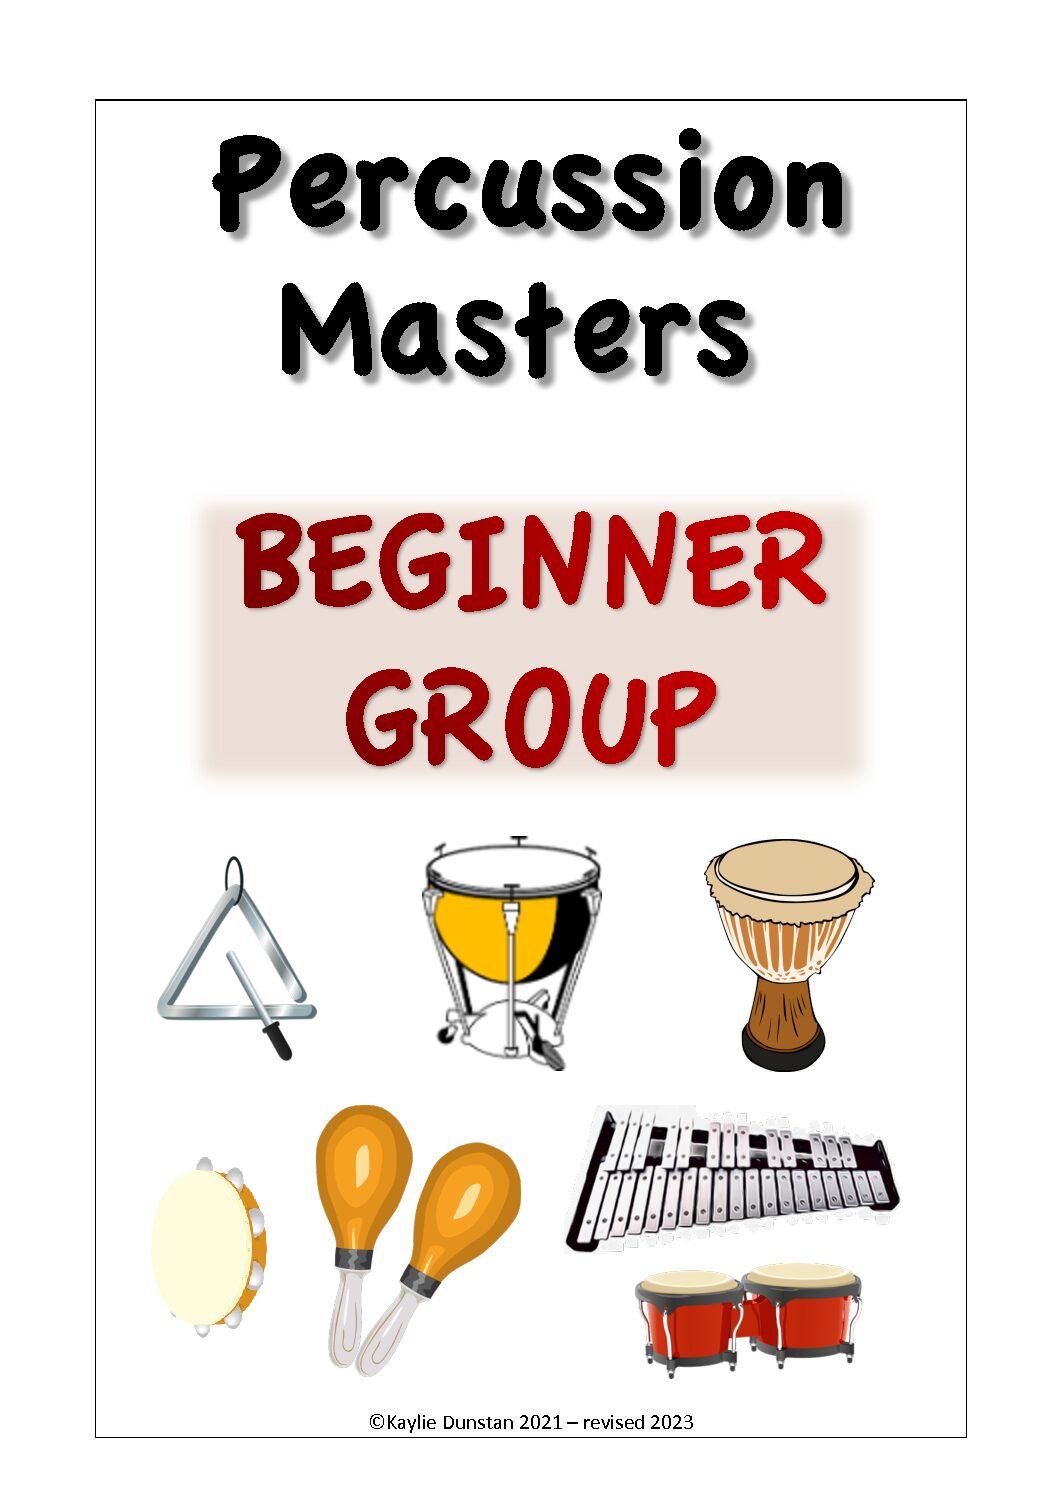 Percussion Masters Beginner Group